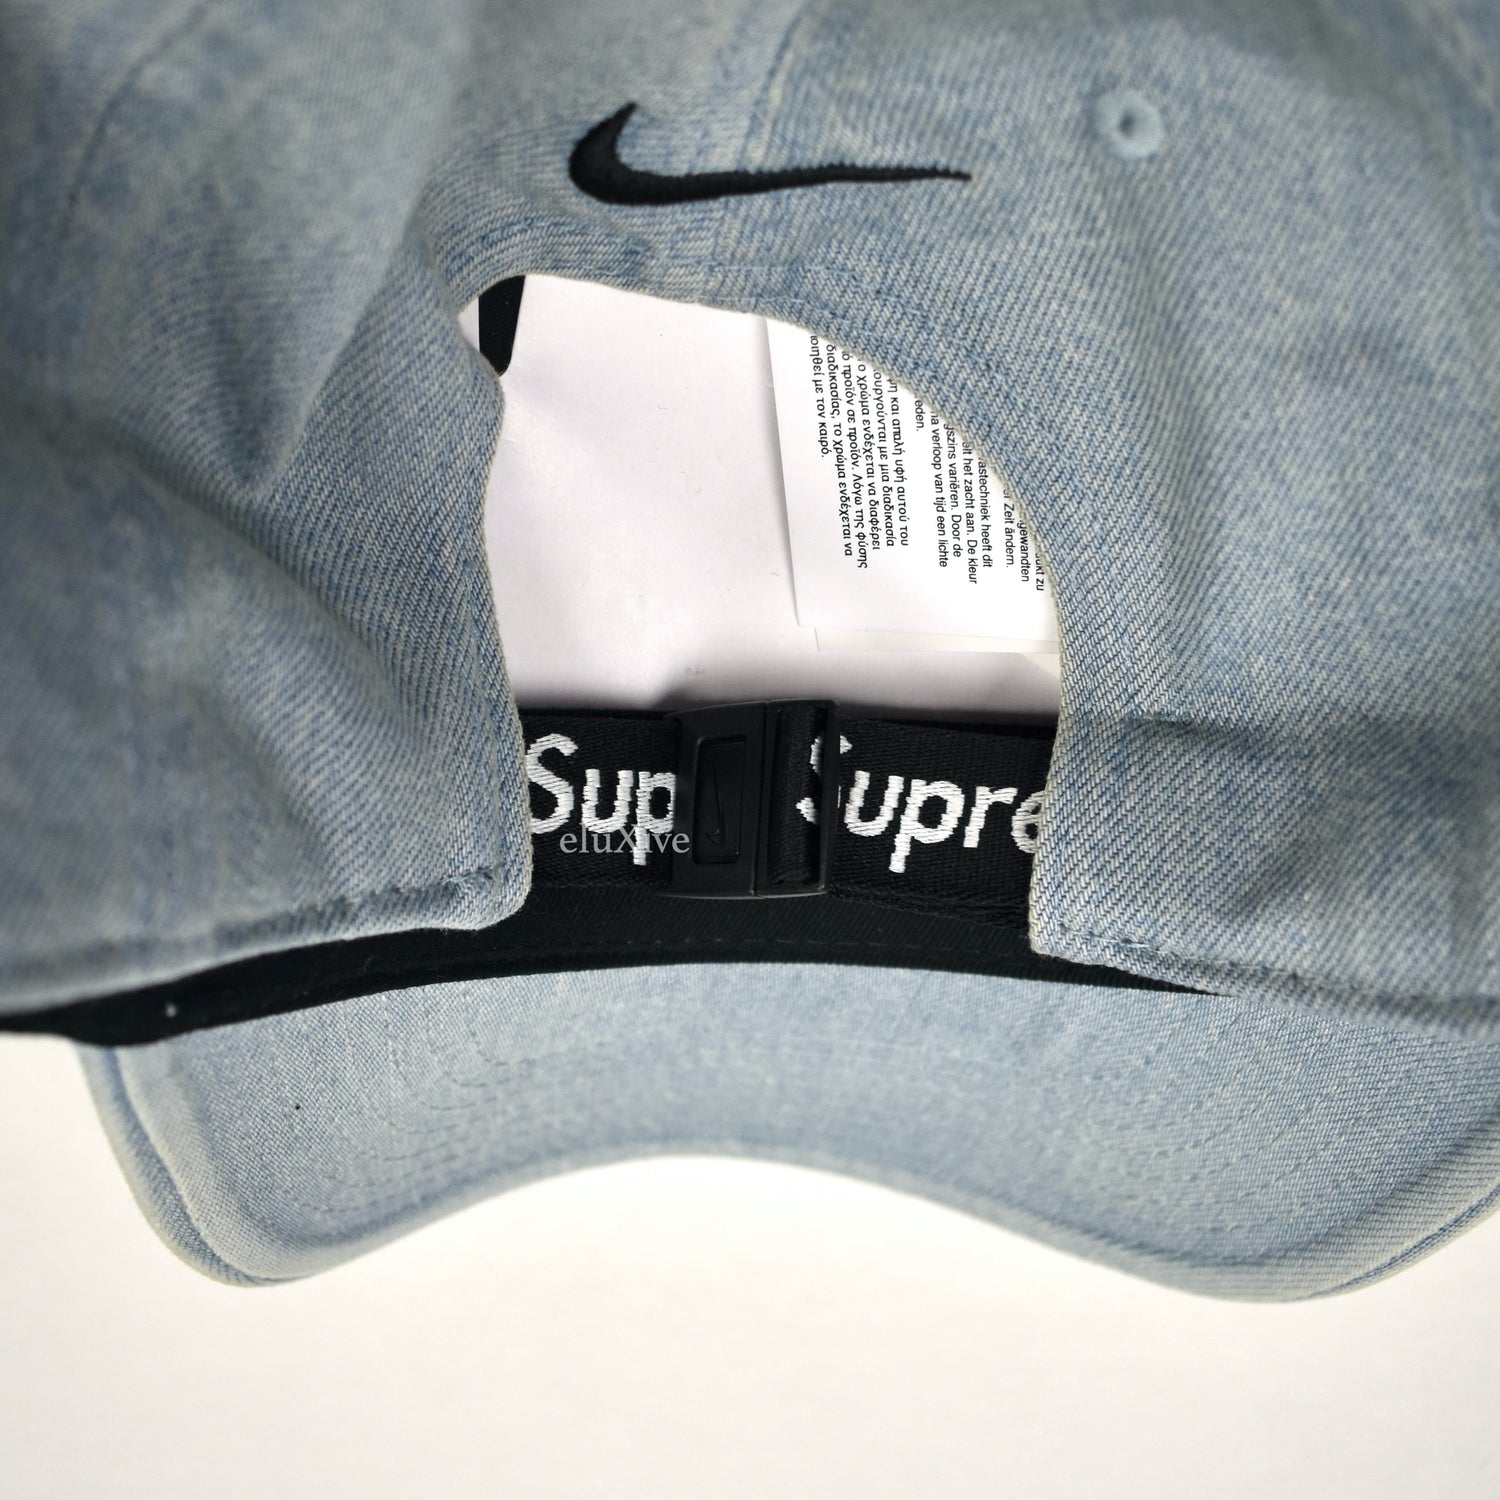 Supreme Washed Chambray S Logo 6 Panel Hat Cap Black SS18 New